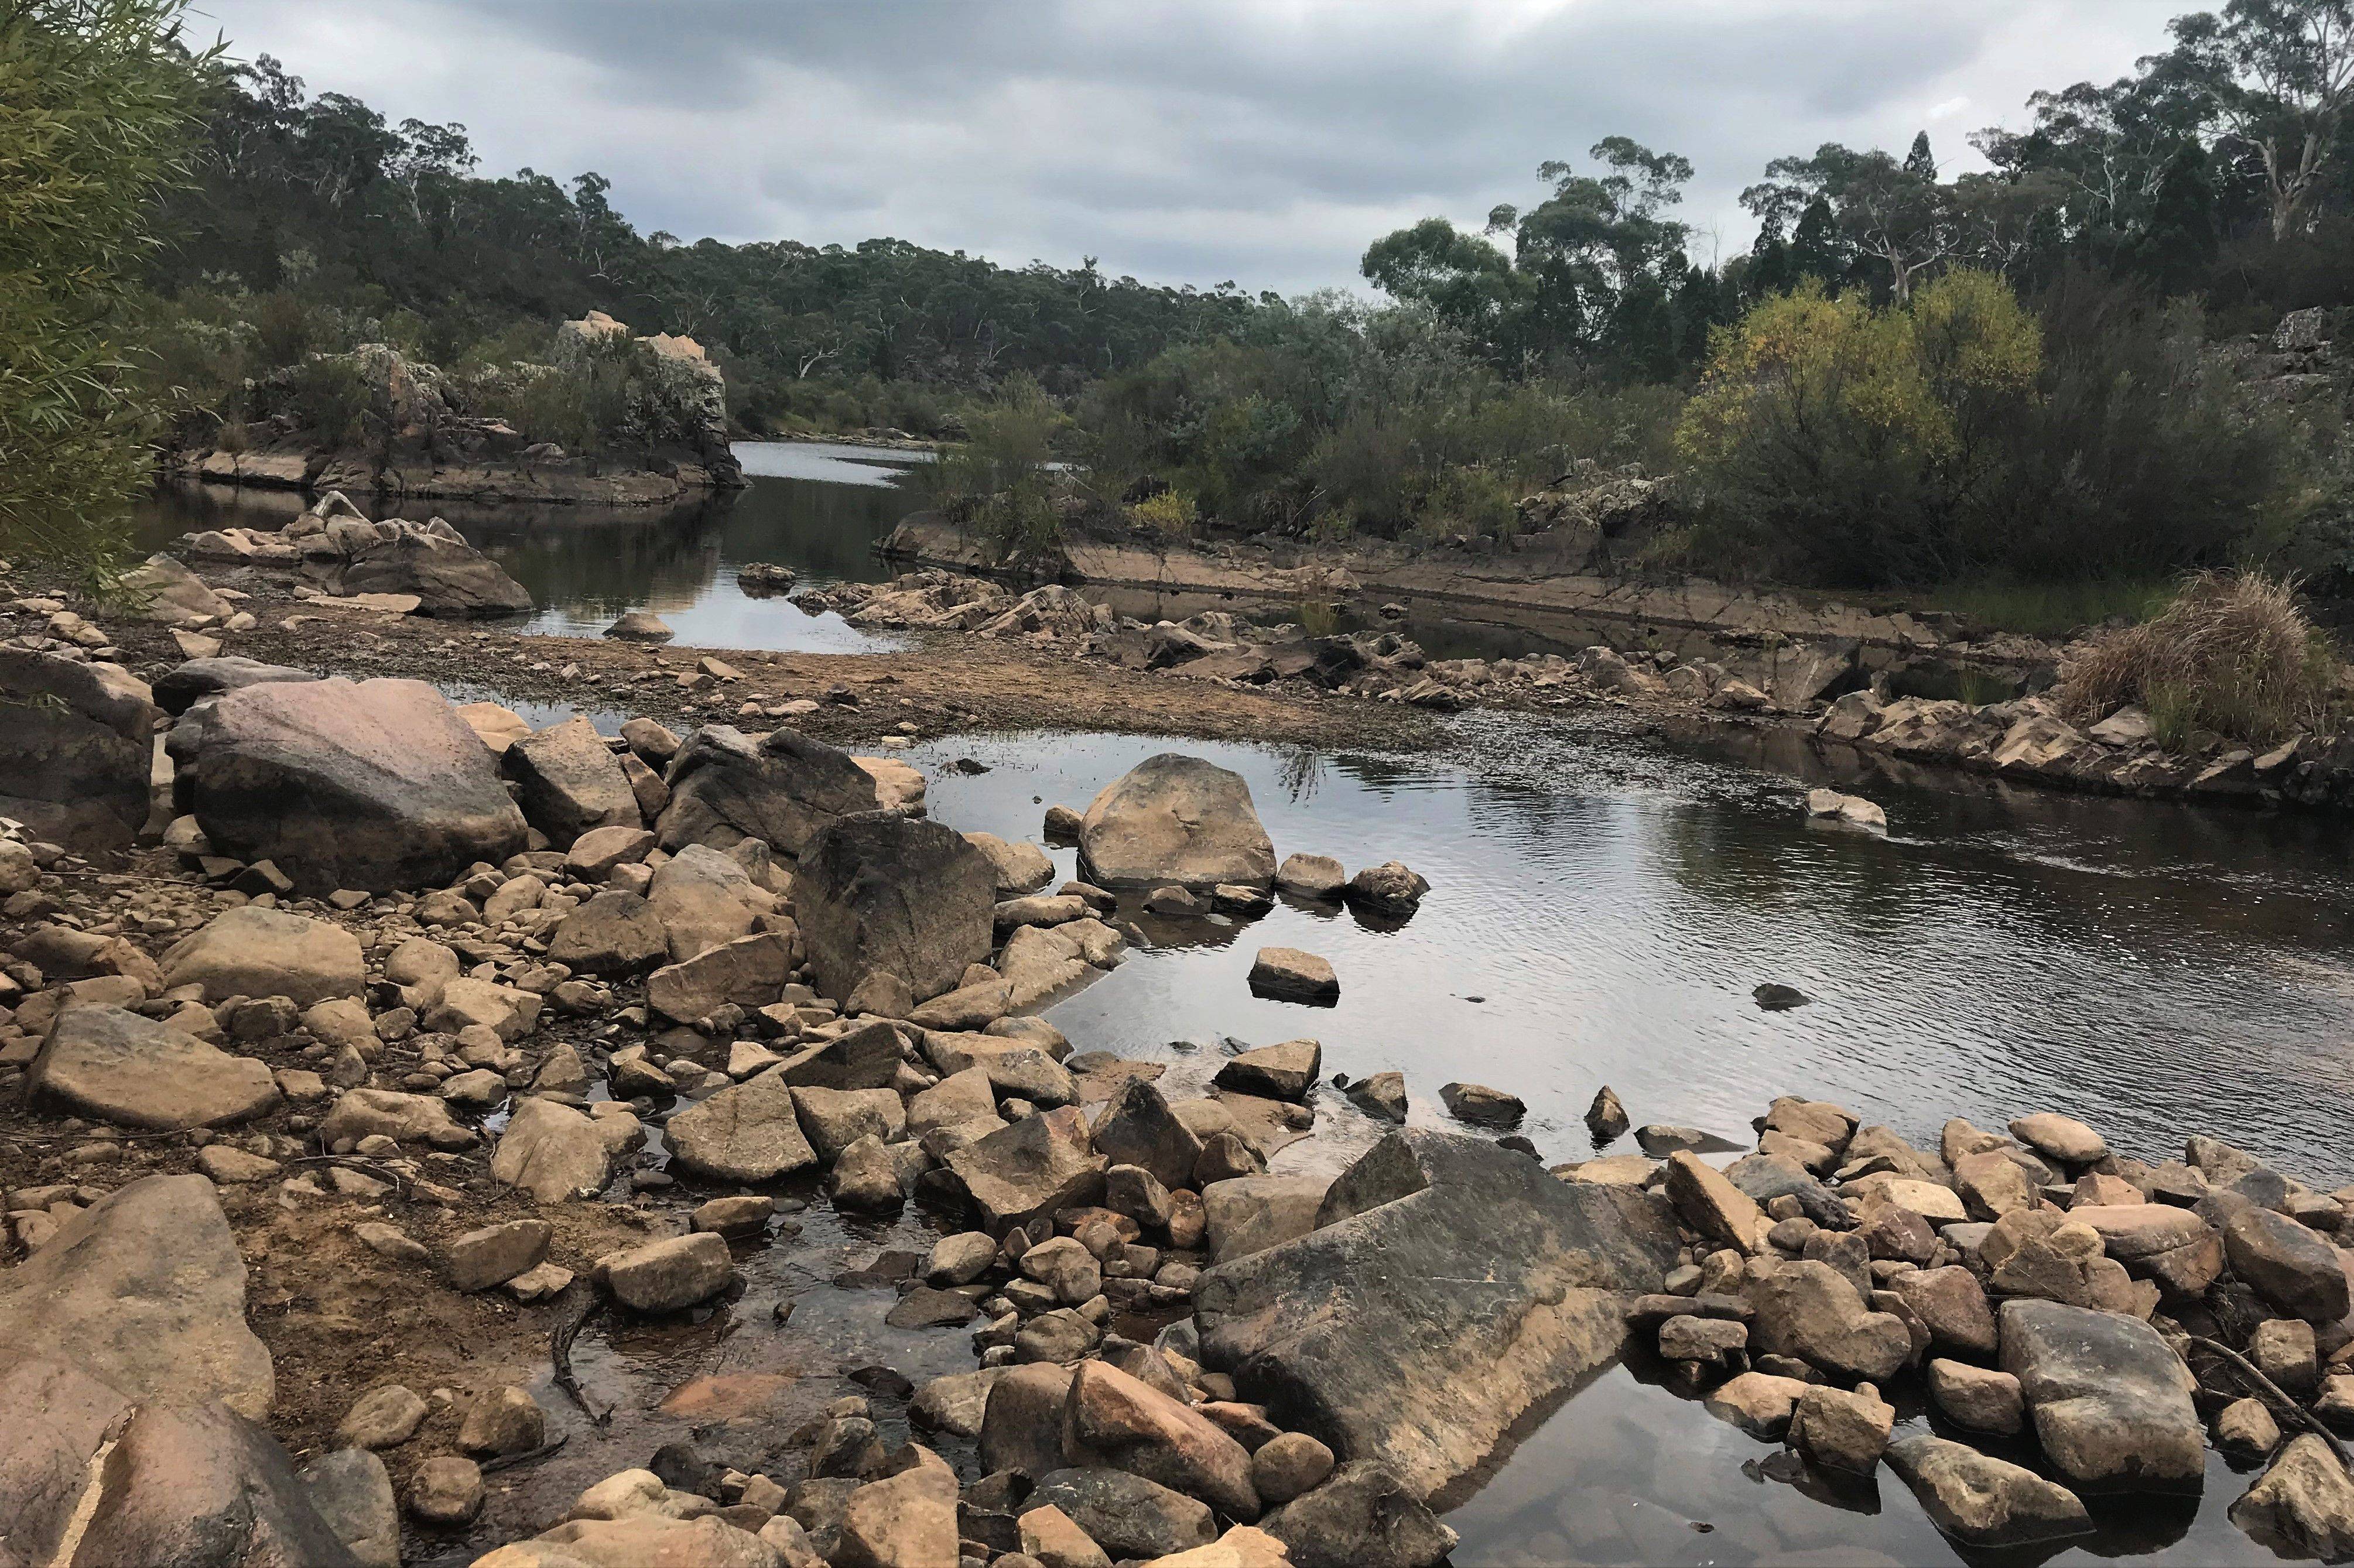 Water woes for Braidwood and beyond as drought dries up Shoalhaven River